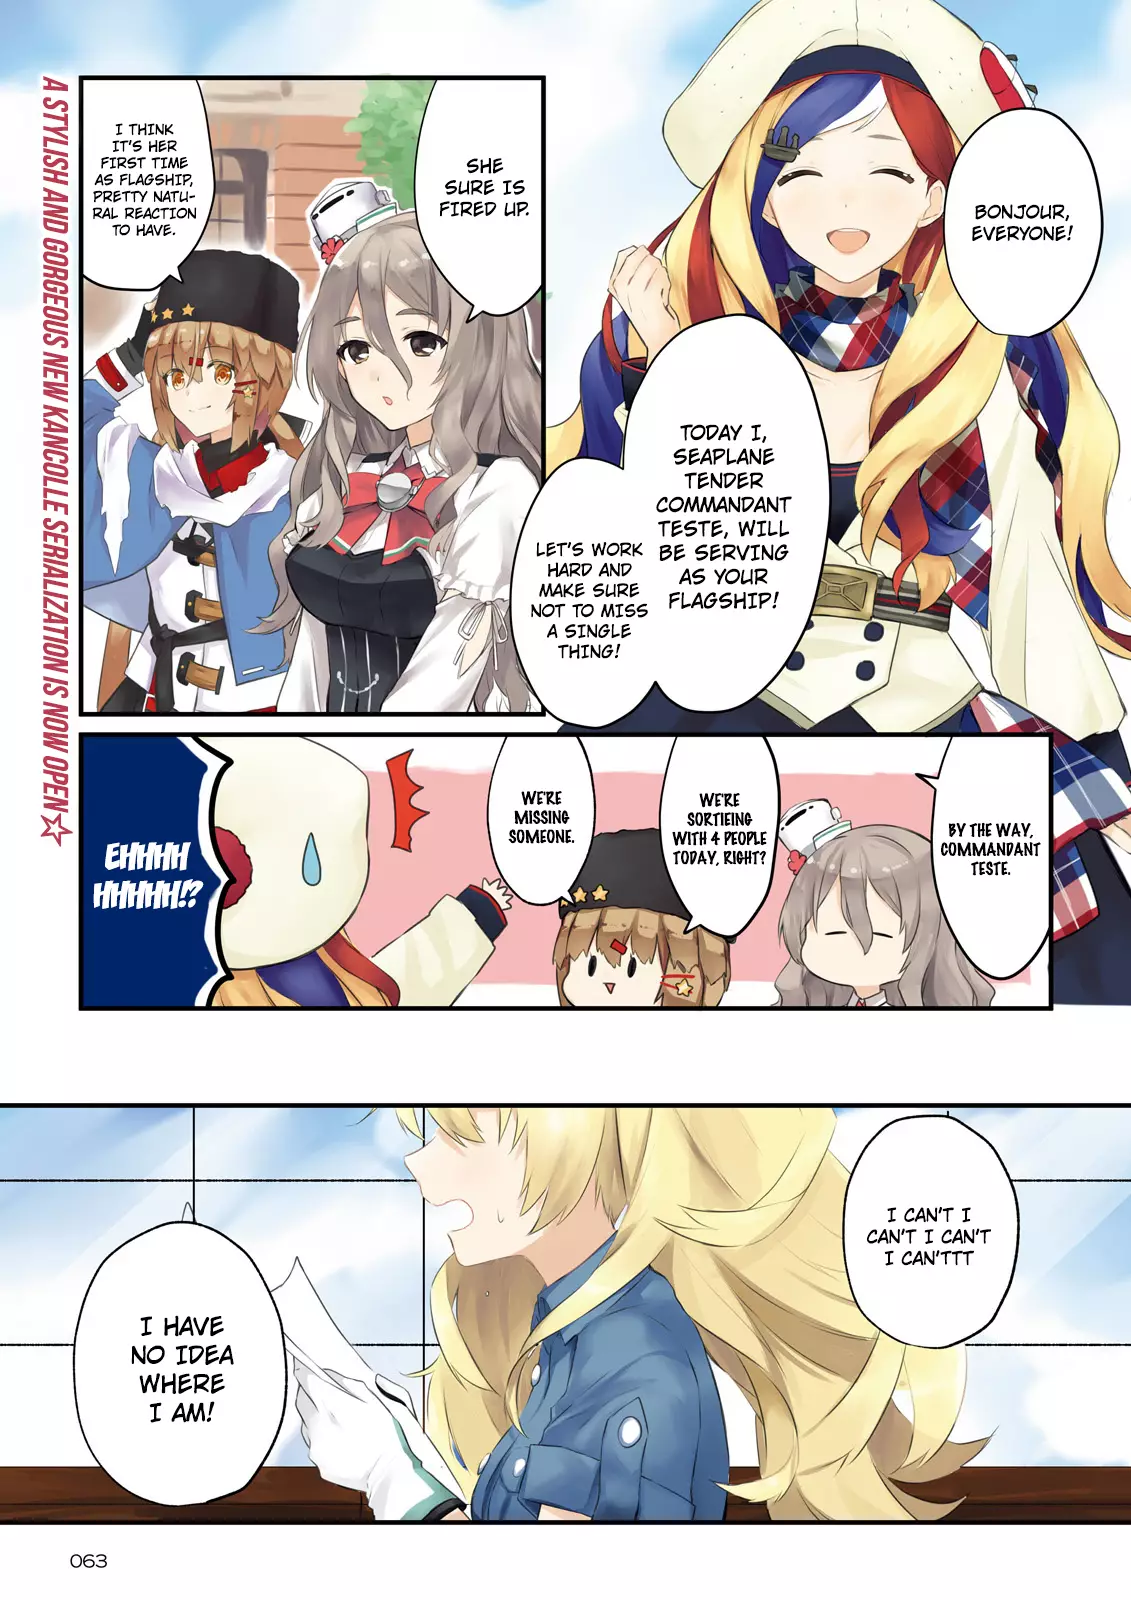 Kantai Collection -Kancolle- Tonight, Another "salute"! - 1 page 1